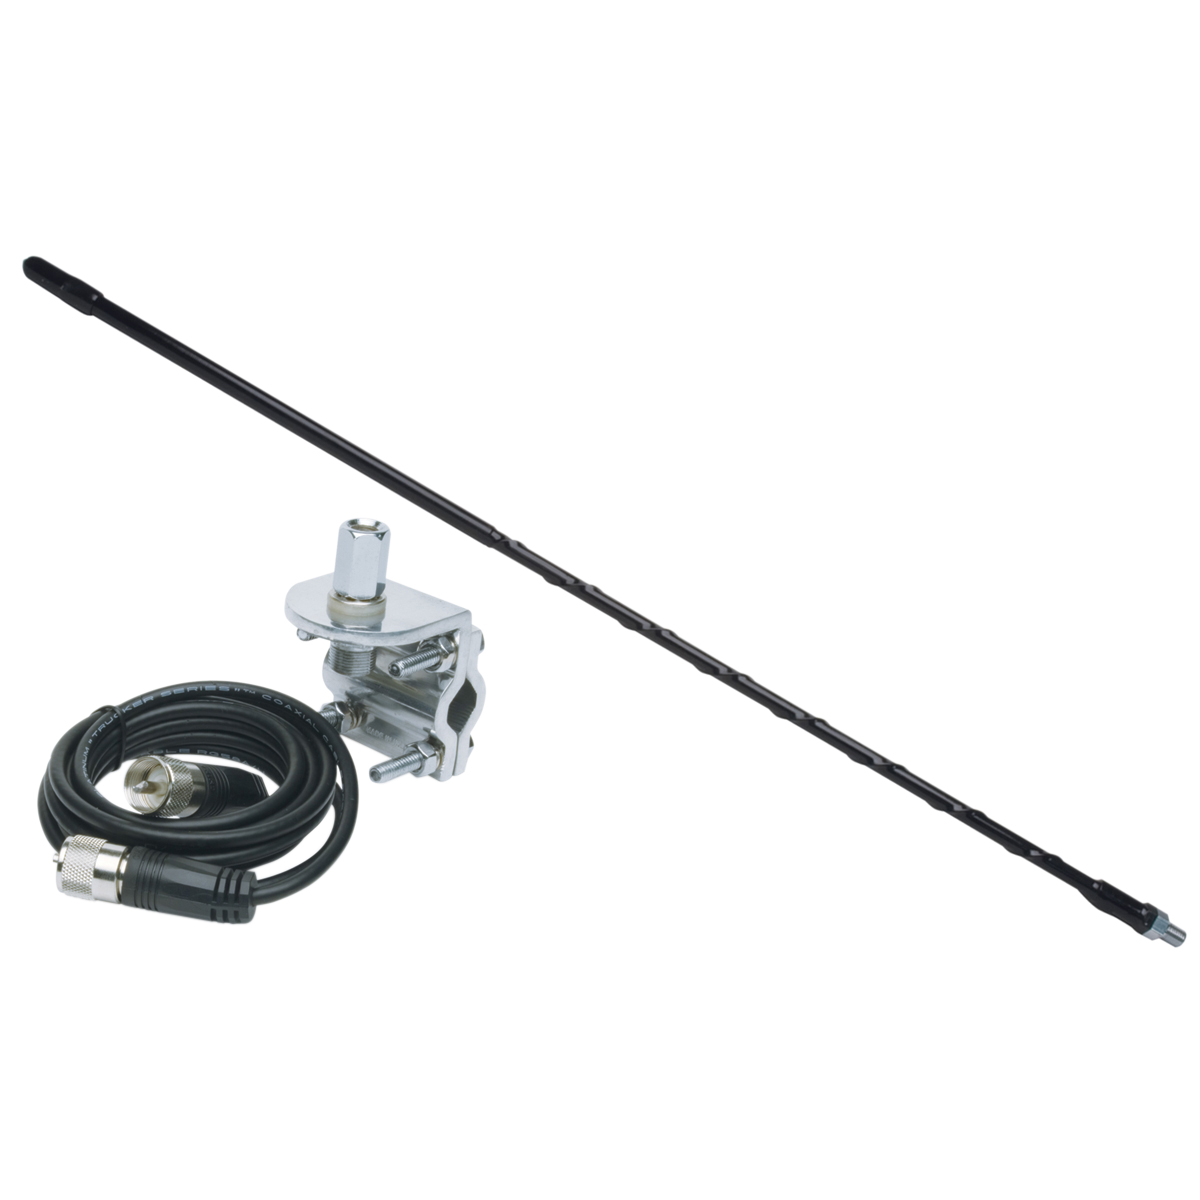 2ft Fiberglass Antenna w Mount and Cable